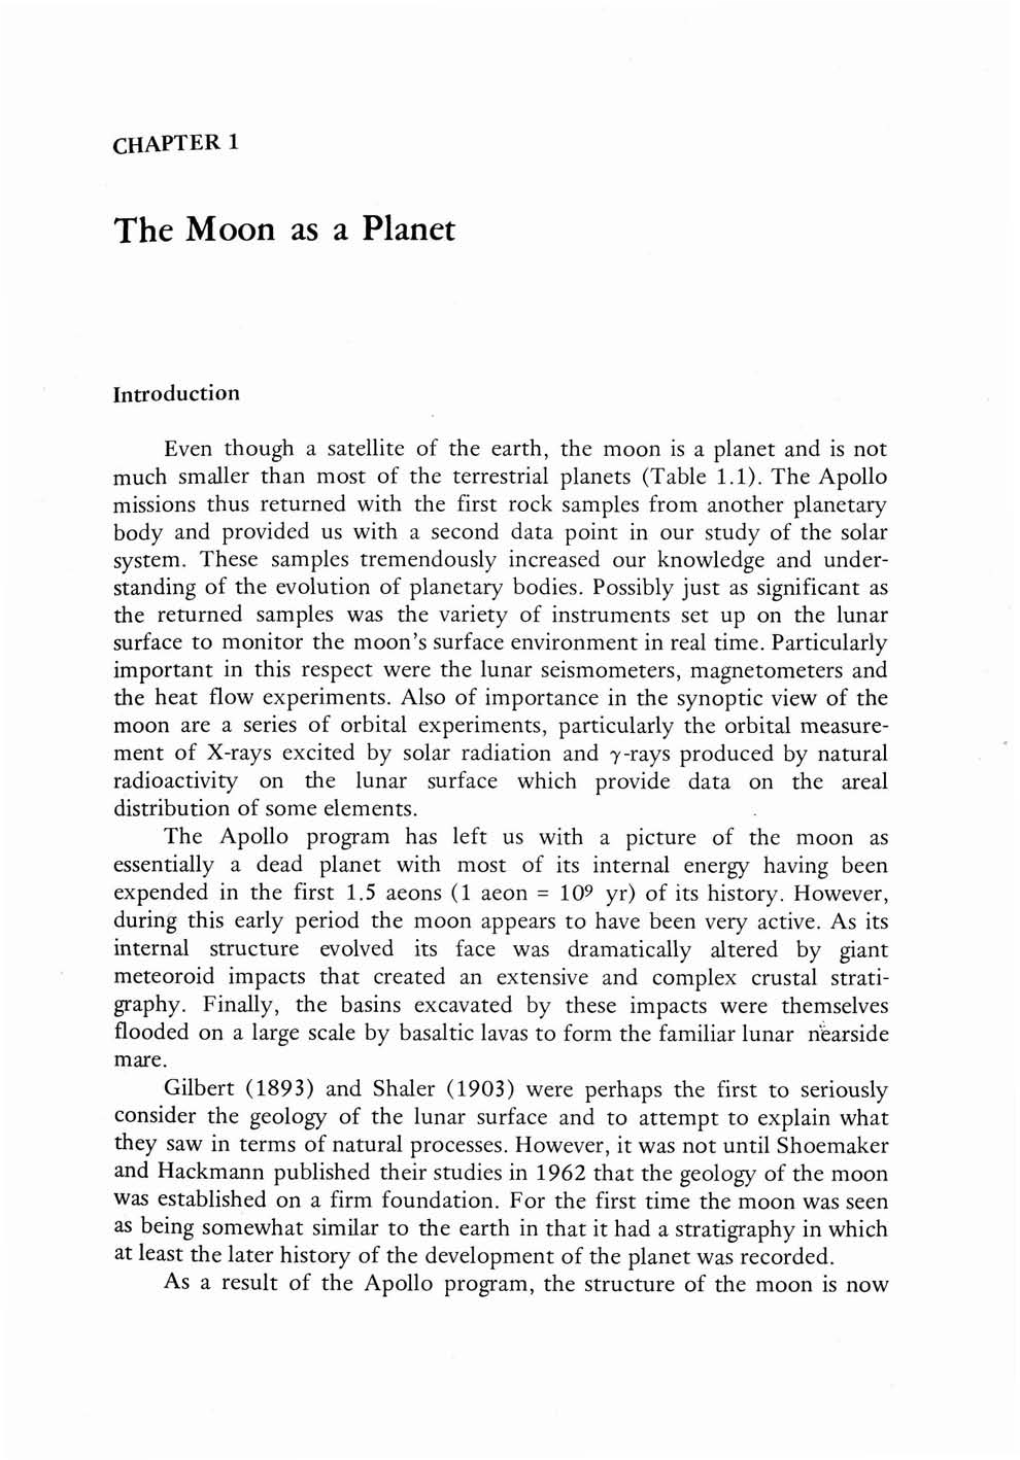 Chapter 1: the Moon As a Planet